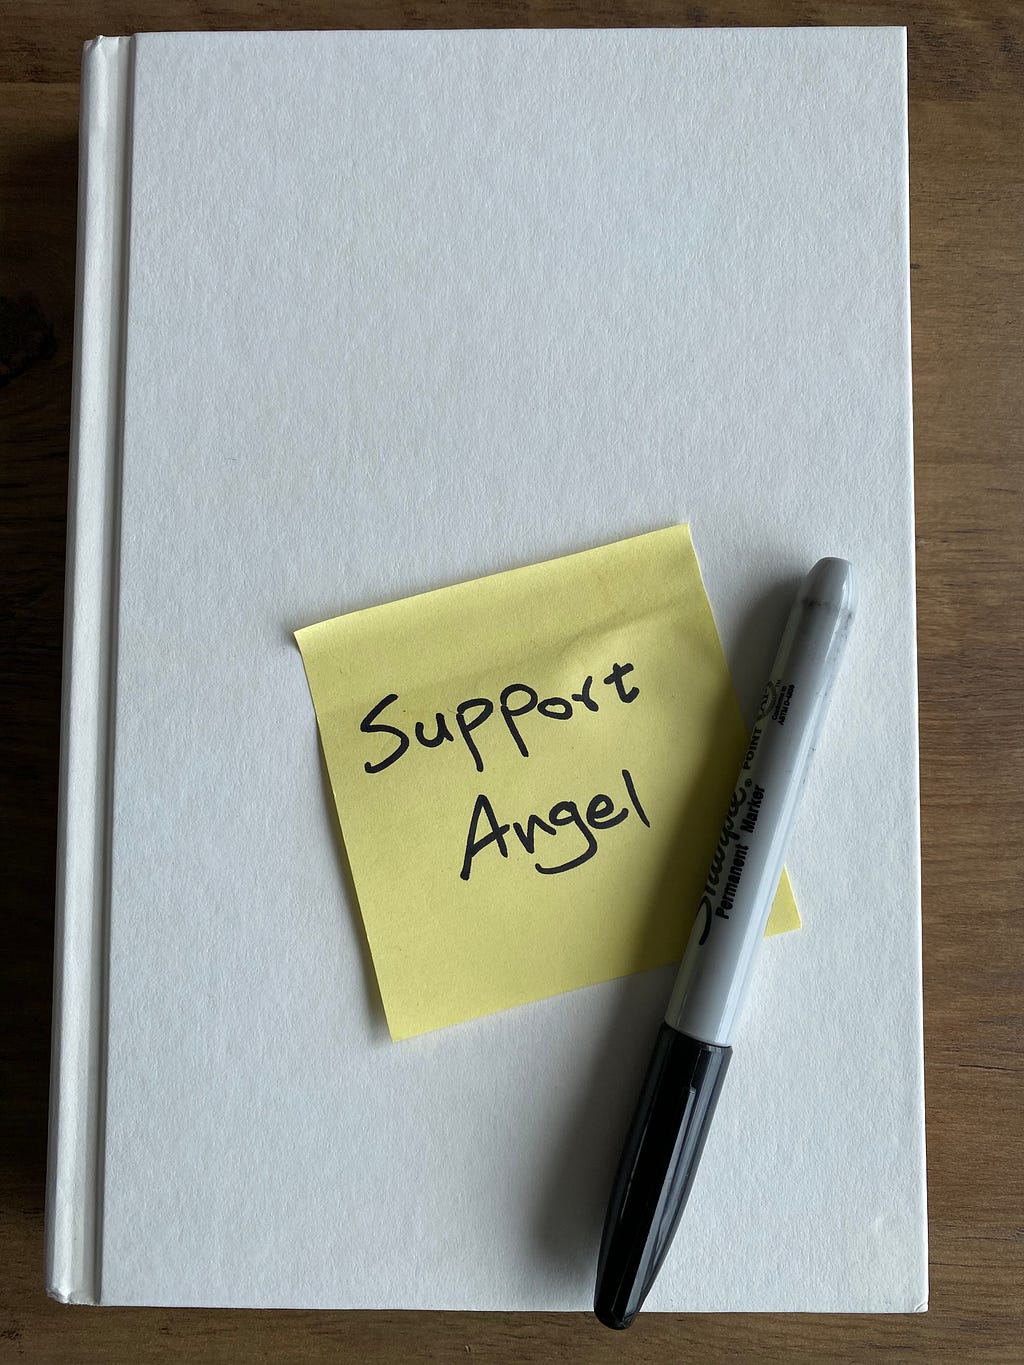 Support Angel for handling external disruptors during the sprint by Hamid Zarei